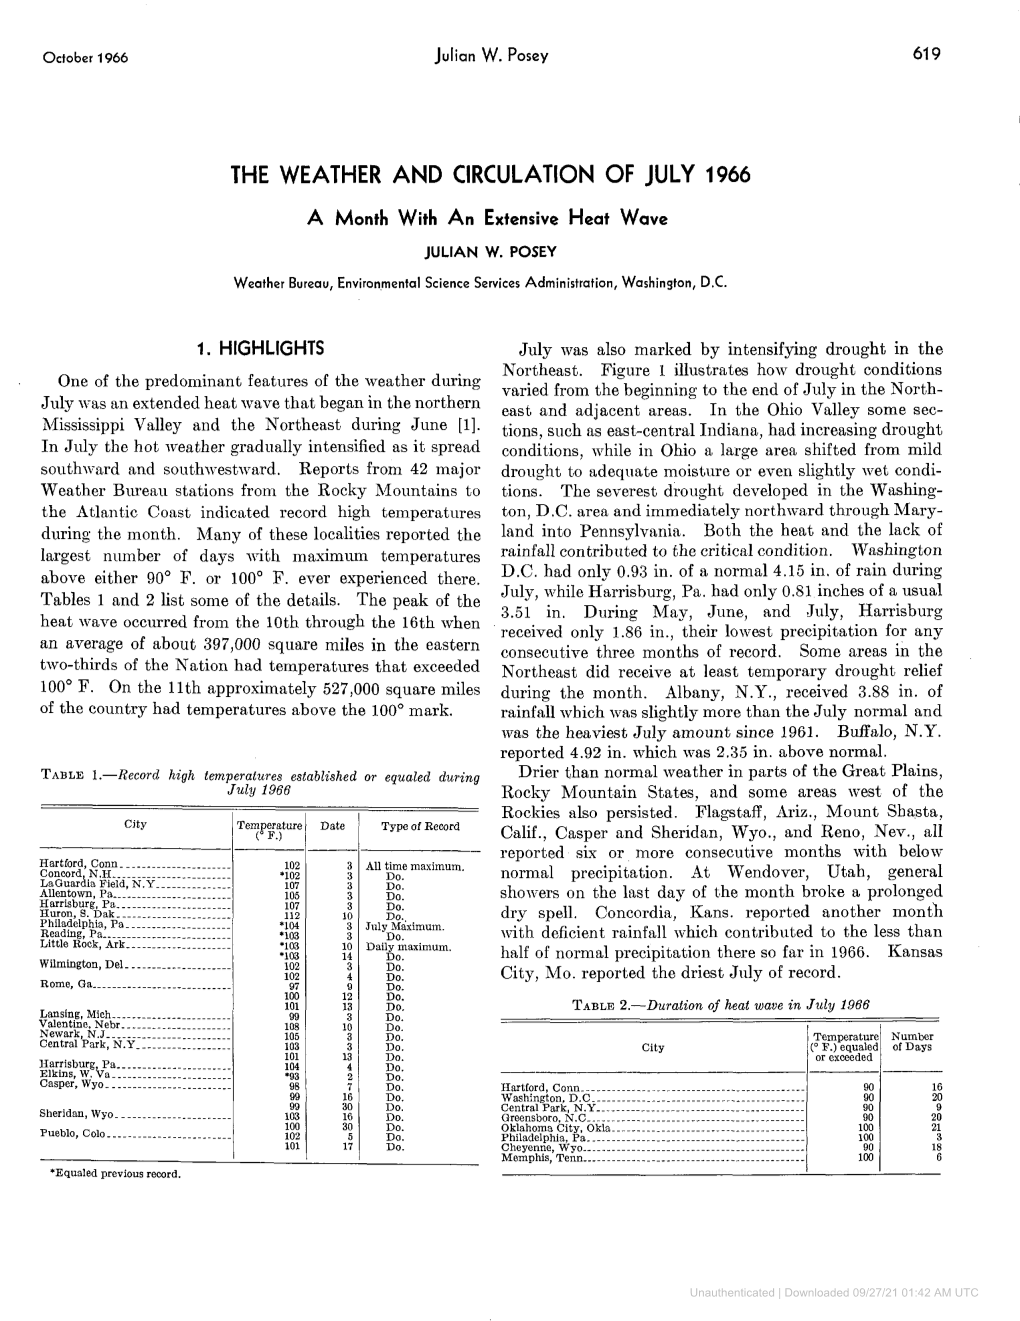 The Weather and Circulation of July 1966